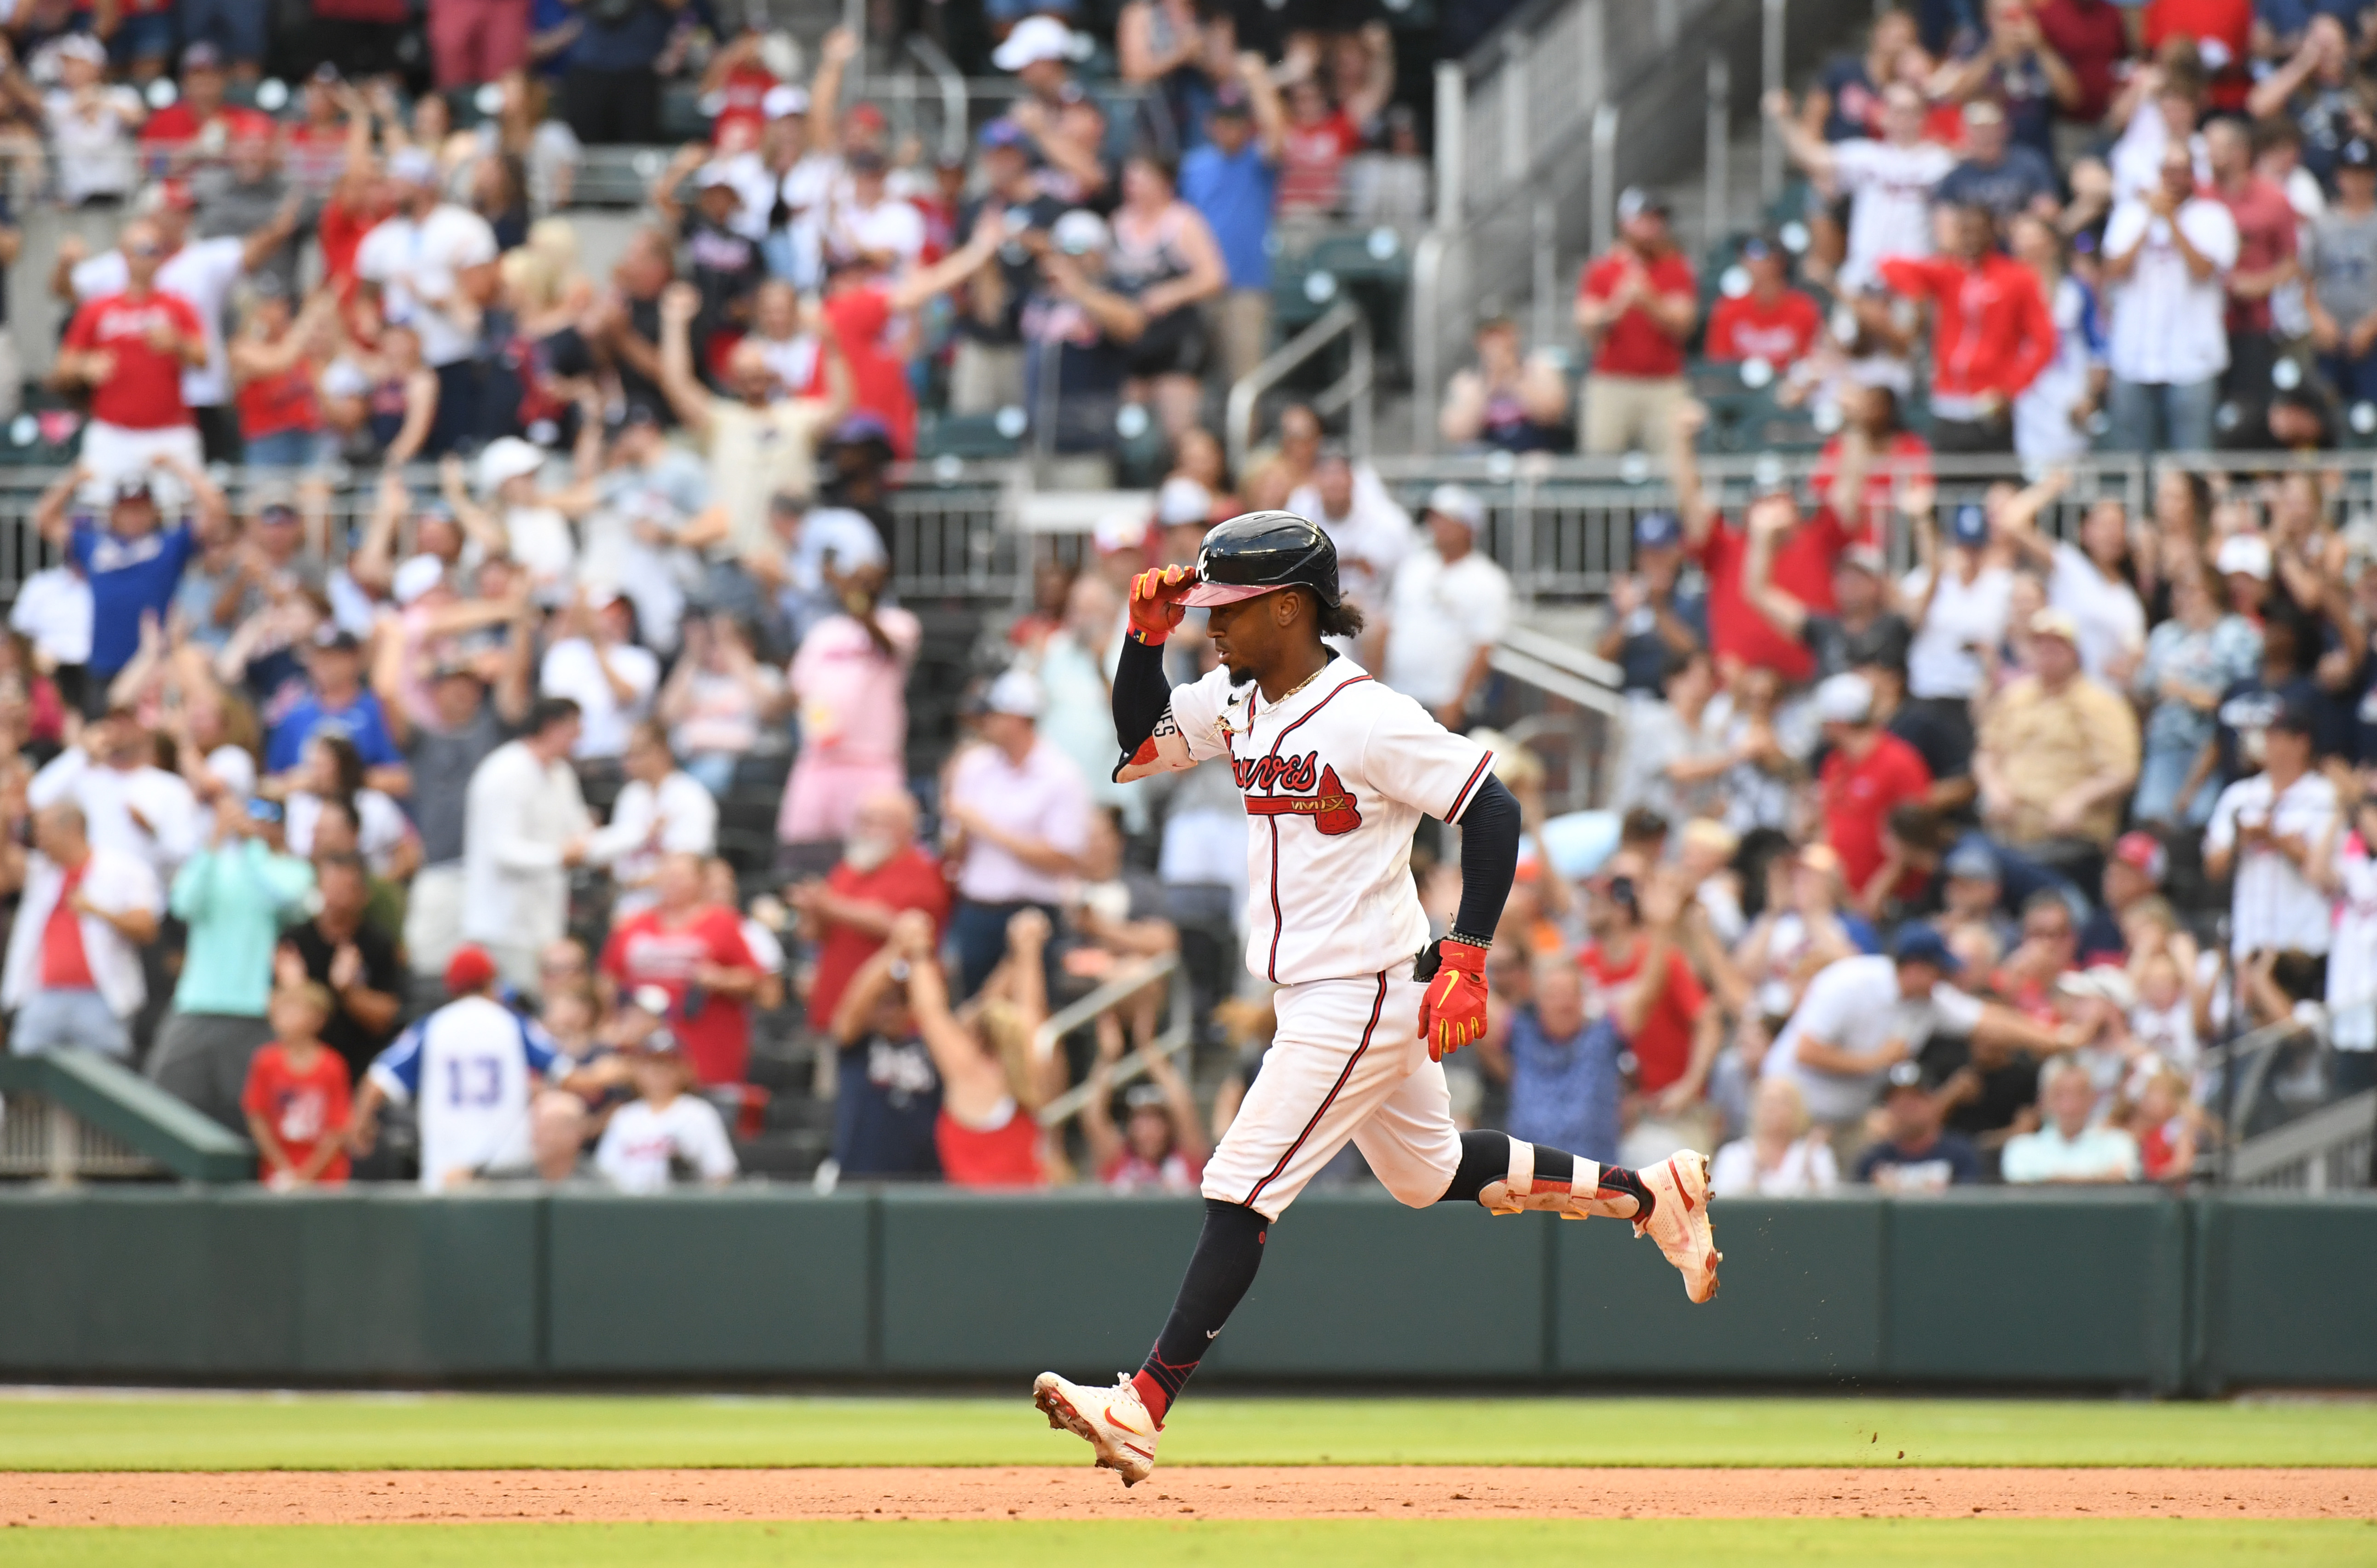 Ozzie Albies walk-off HR lifts Braves over Reds in 11th